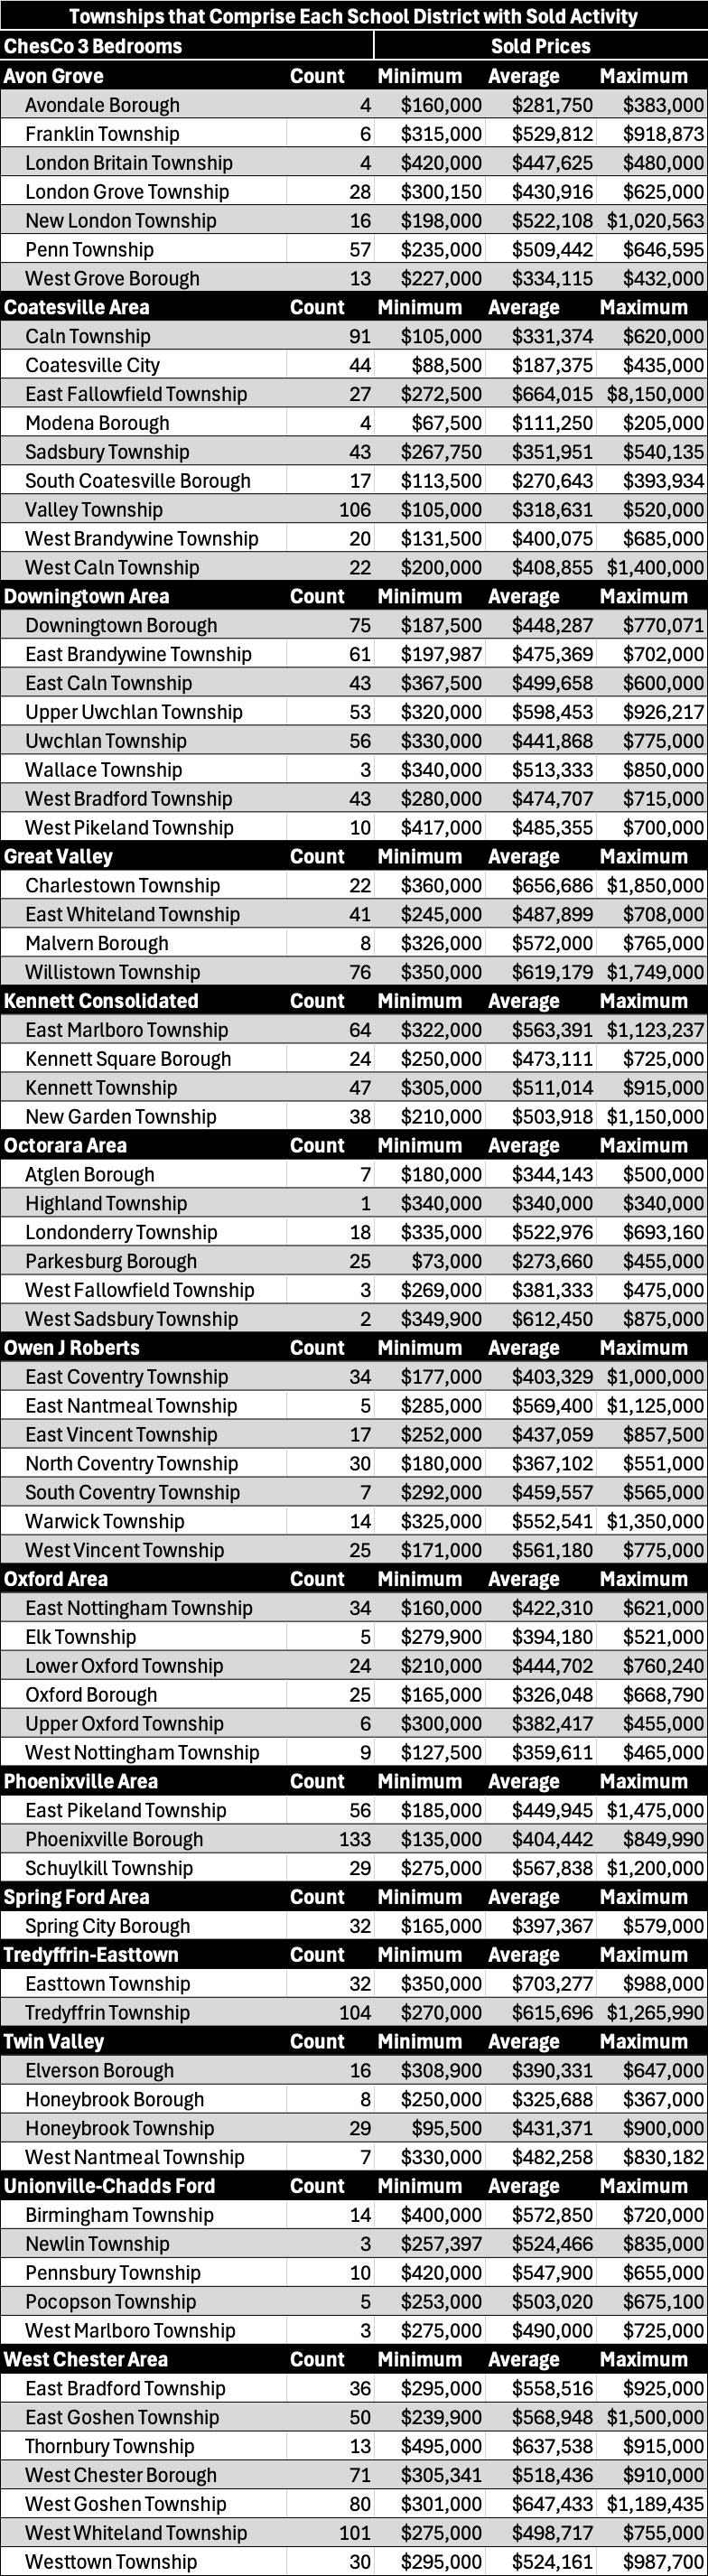 A table of each township within each School District in Chester County, PA for studios and 3 bedrooms, which includes the number of transactions and each township's corresponding sold prices displayed as minimum, average and maximum. 